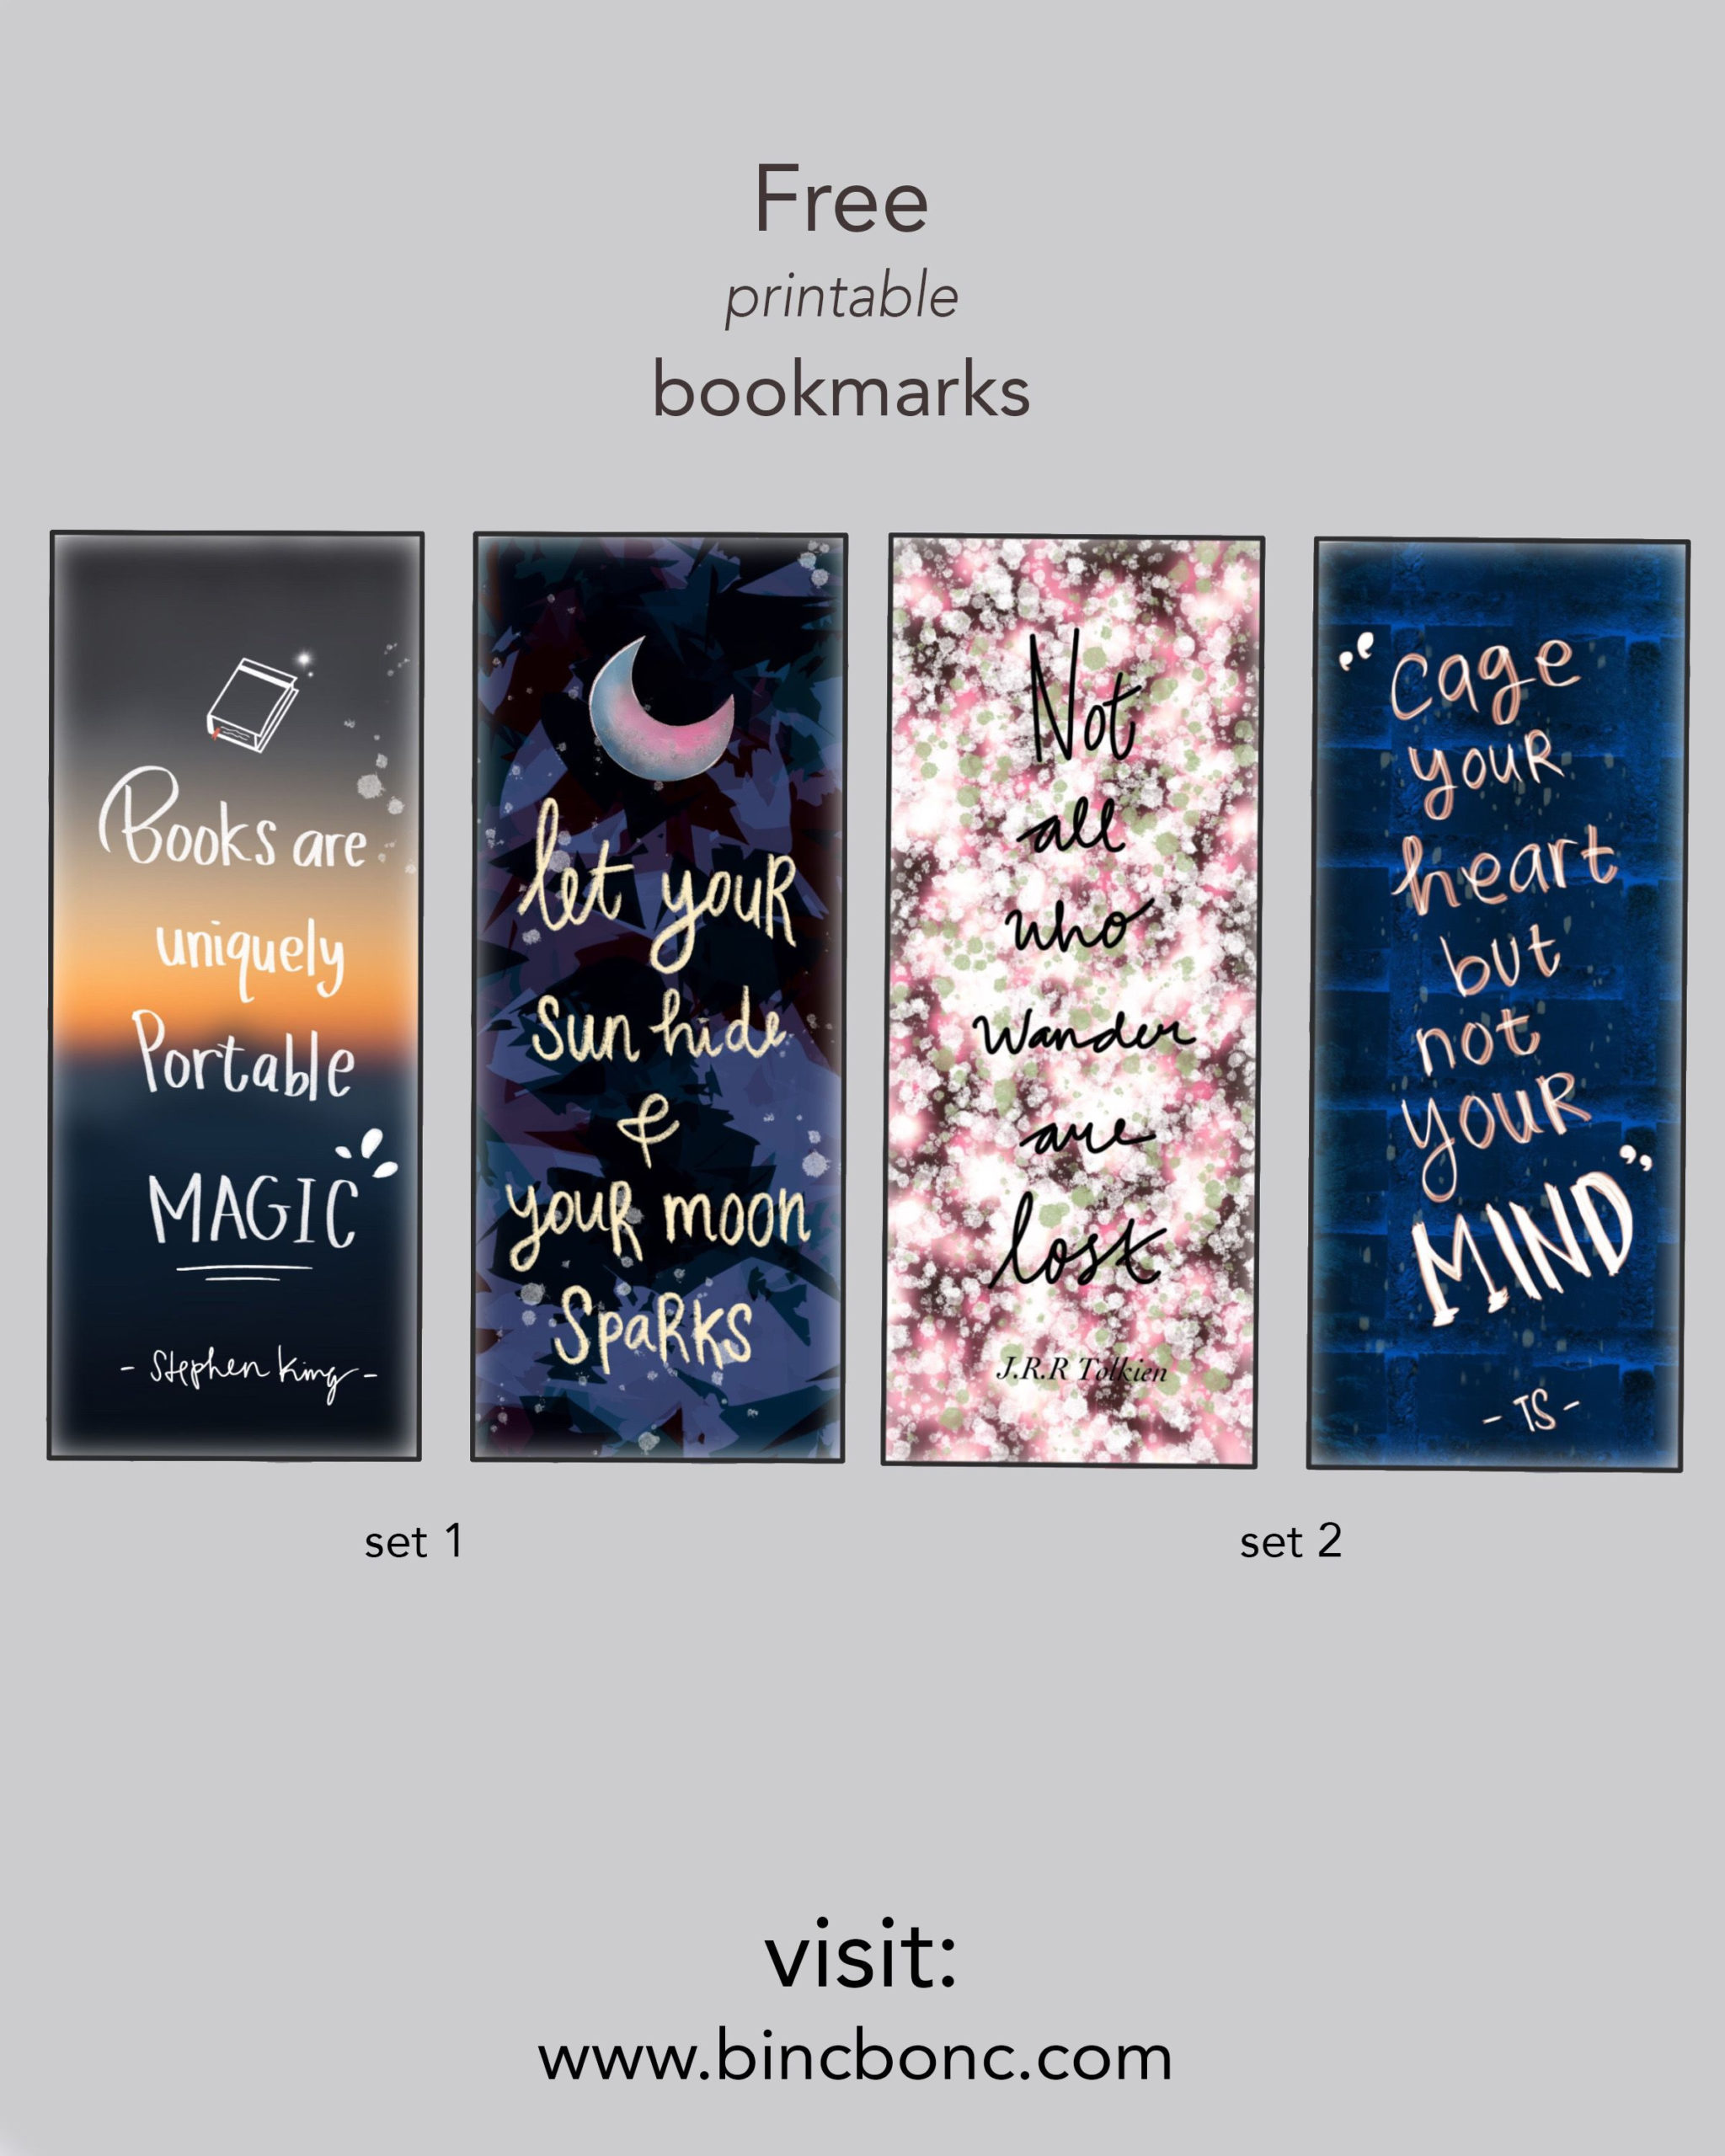 FREE Printable Bookmarks Free Printable Bookmarks Bookmarks Cool 